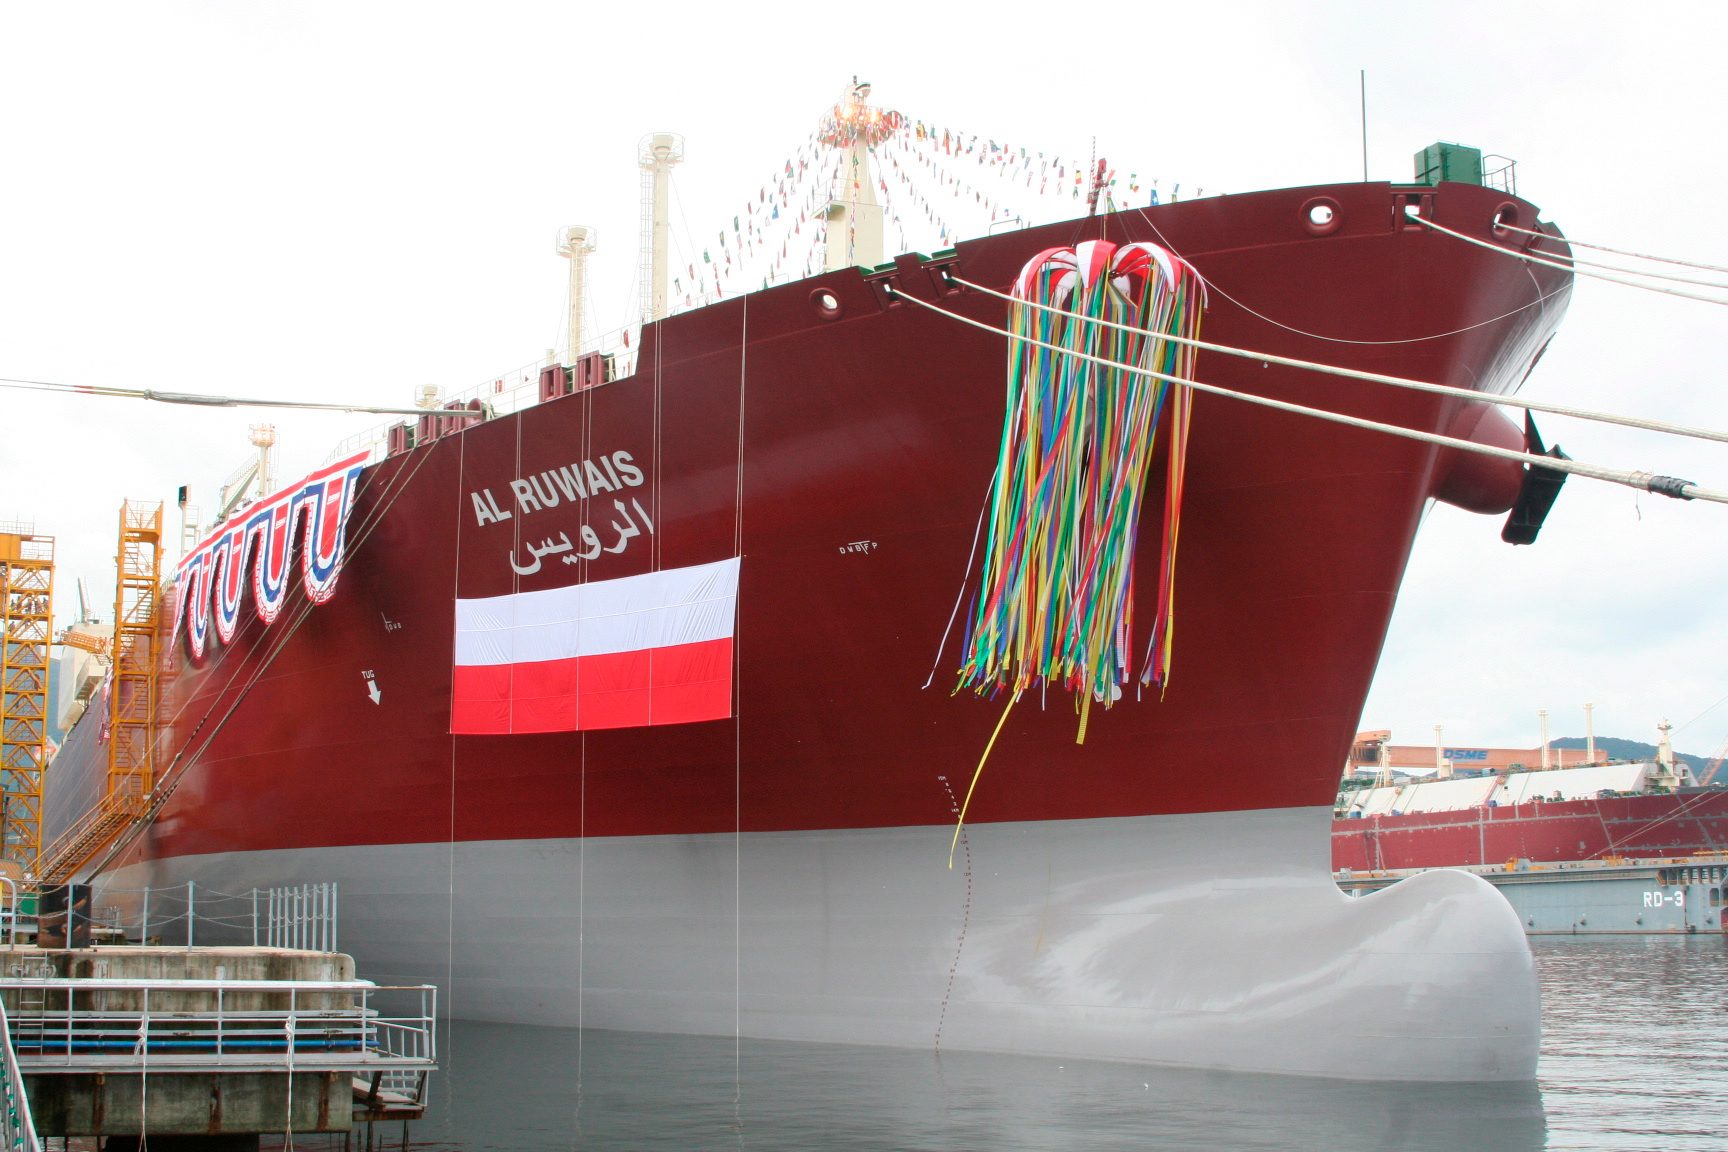 BUILT BY DAEWOO. LNG carrier Al Ruwais is commissioned at Okpo Shipyard in South Korea's port city of Geoje on September 7, 2007. File photo by Yonhap/EPA 